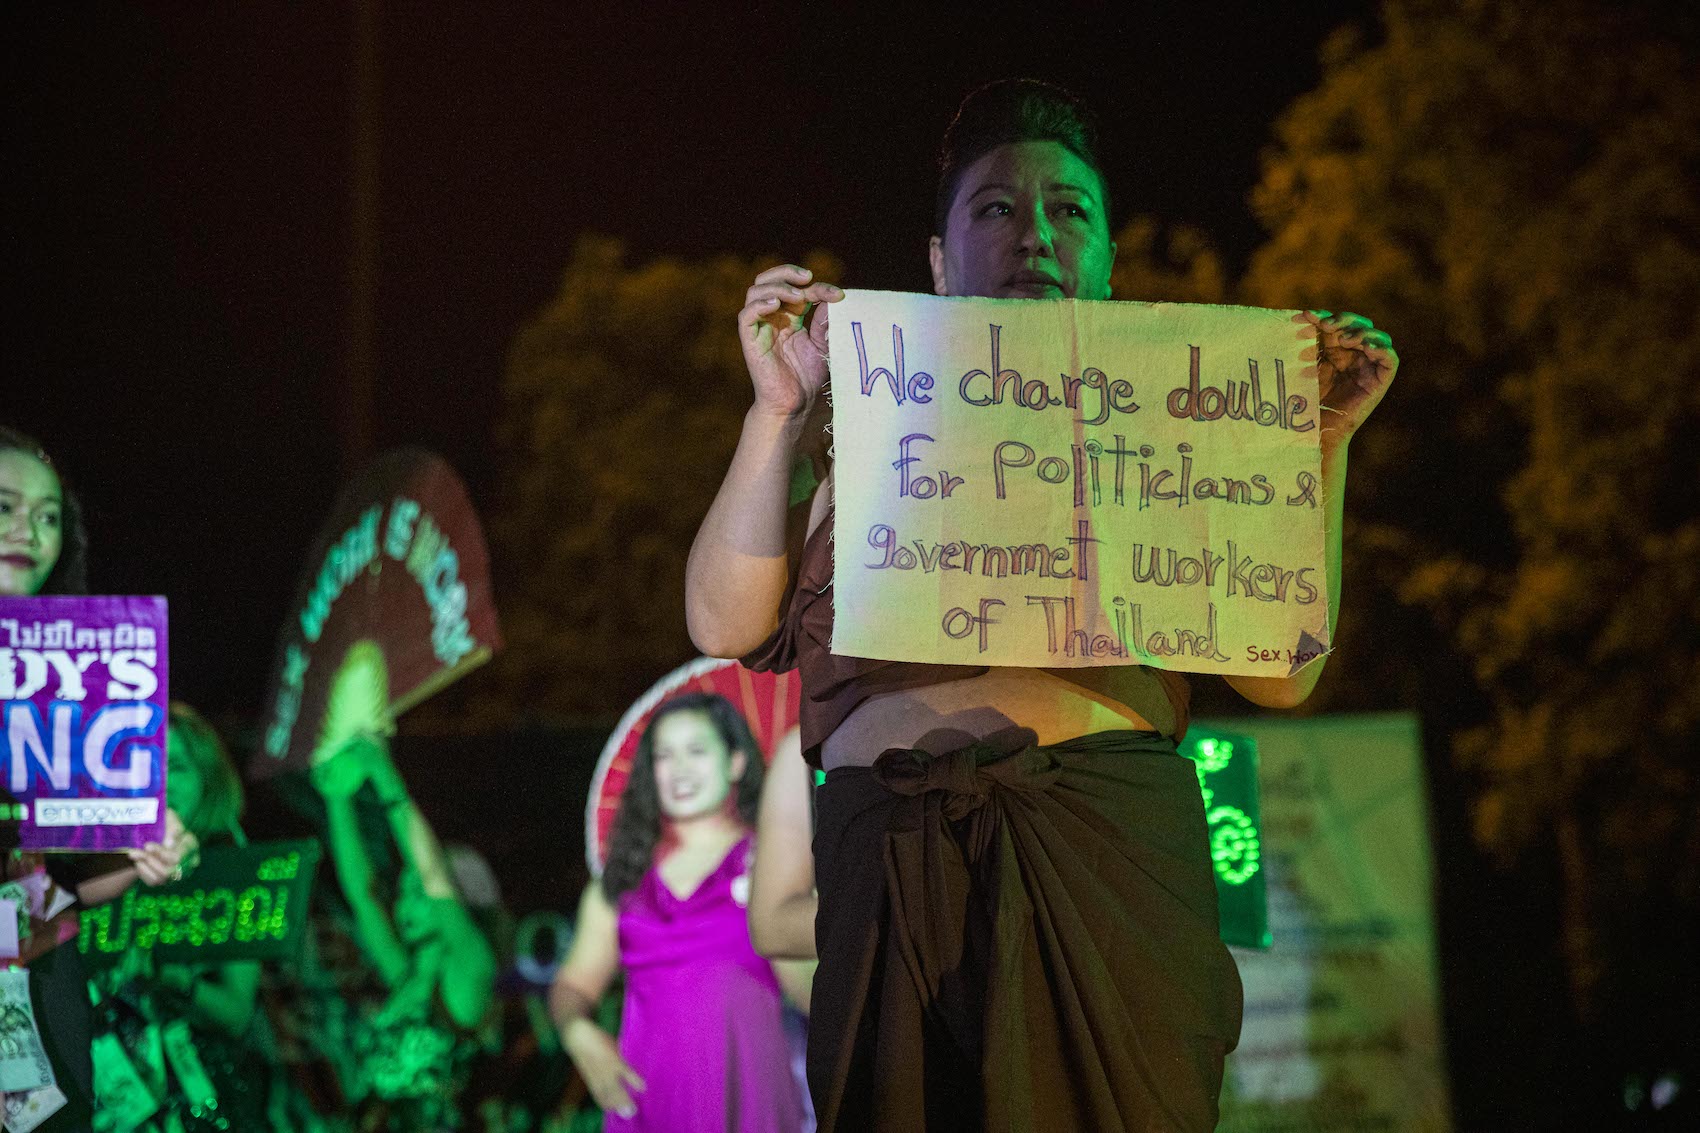 An activist holds a placard that says "We charge double For politicians & government workers of Thailand" during a Sex Work Fashion Week